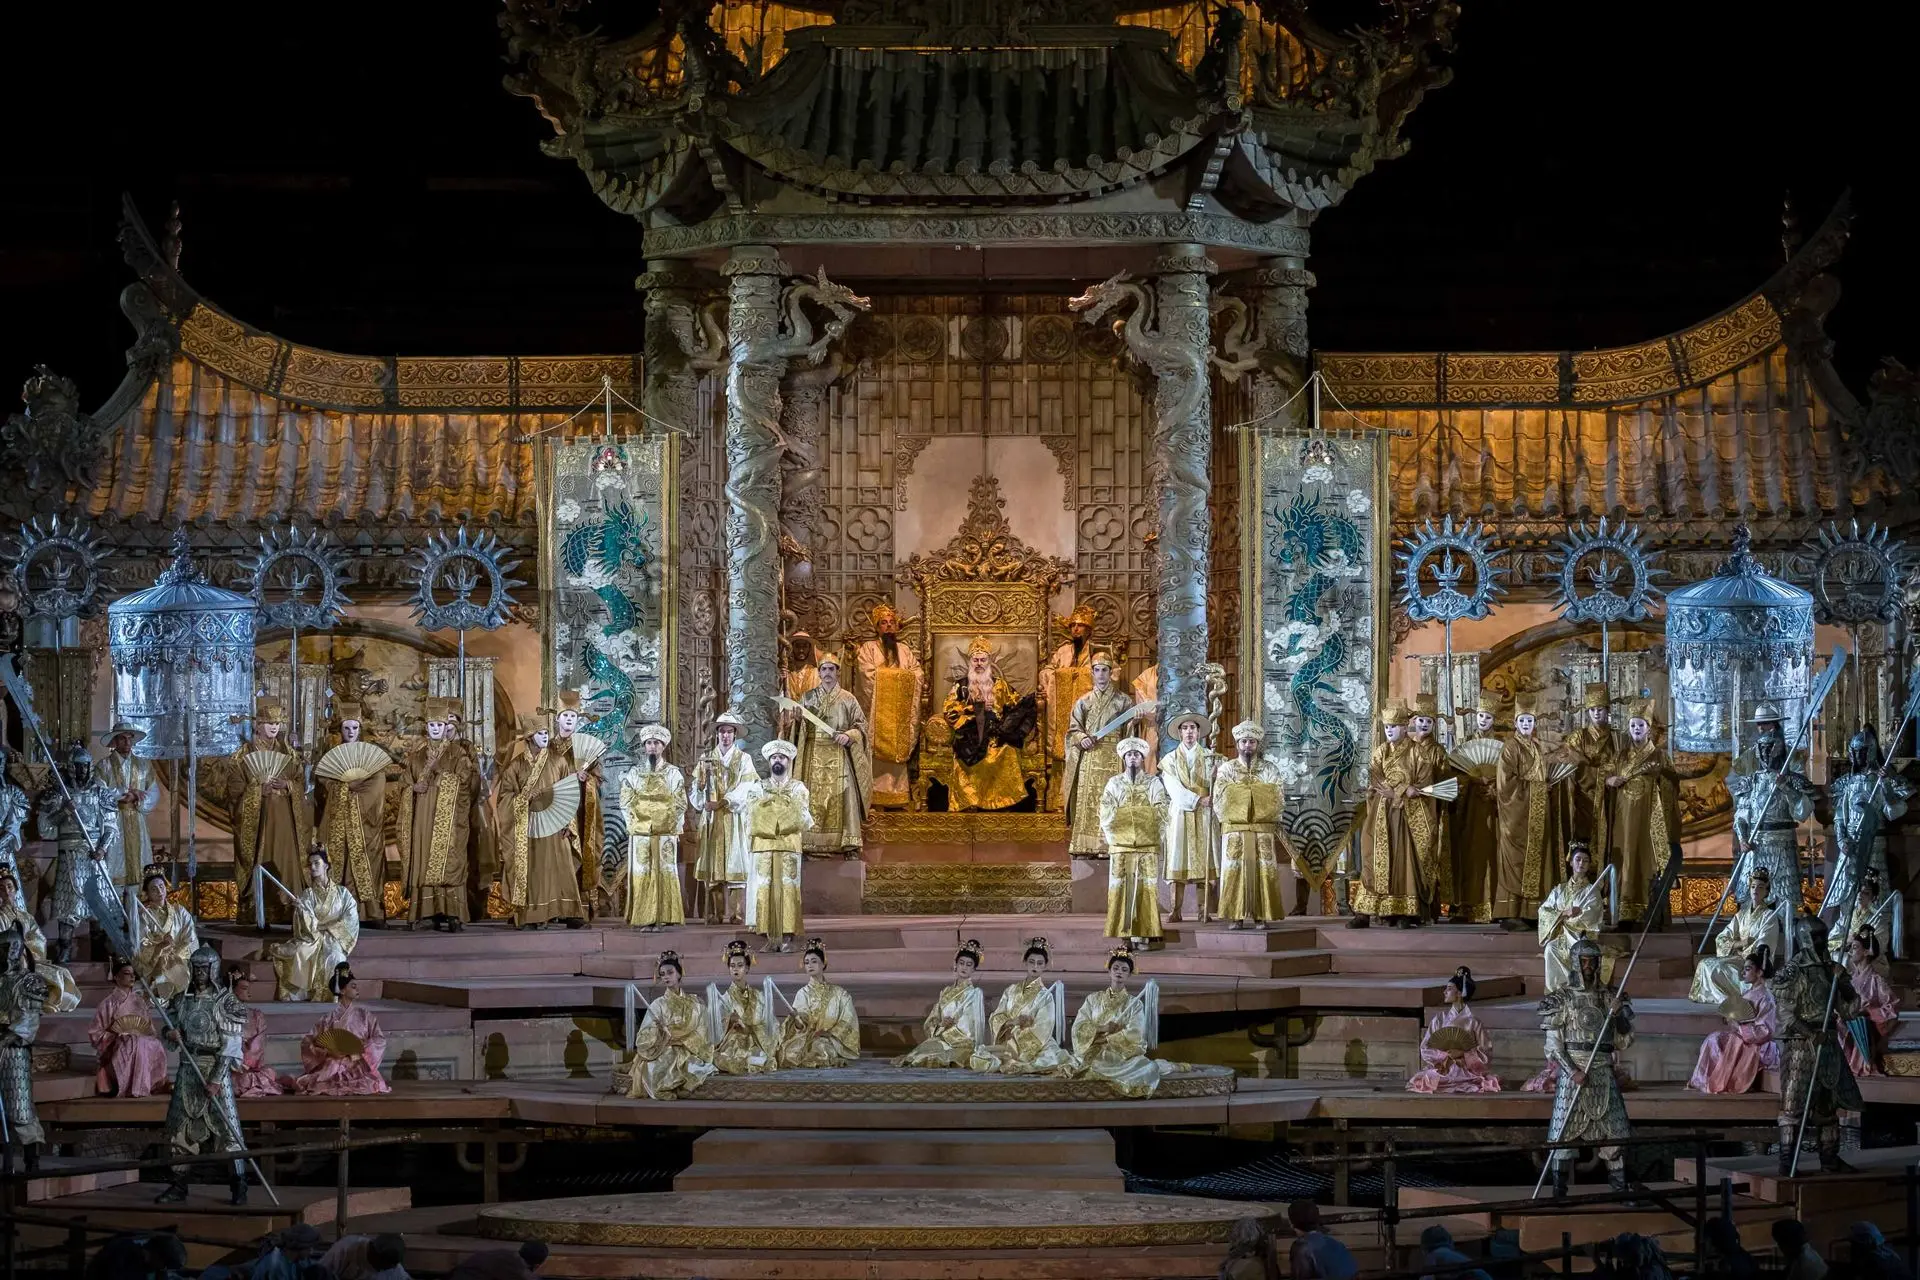 The stage is dominated by the palace of emperor Altoum. The gold and silver of the building glitter with jade green reflections. The main part of the building is formed by the baldacchino above the throne. It recalls the Baldacchino of Saint Peter’s Basilica by Bernini. It is supported by four twisted Solomonic columns with dragons coiled around them. Sitting on the throne is emperor Altoum. To the right and left of the baldacchino stand the banners of the emperor, one on each side. They are silver and gold with a blue dragon emblazoned on them. In front there are steps where the crowd stands. There are ballerinas in pink with parasols, supernumeraries in white with plumes, dignitaries in beige with fans, and concubines dressed in clothes made of shiny cloth. This scene creates an effective contrast between the imperial space and that of the commoners, which appears even more shabby and listless.